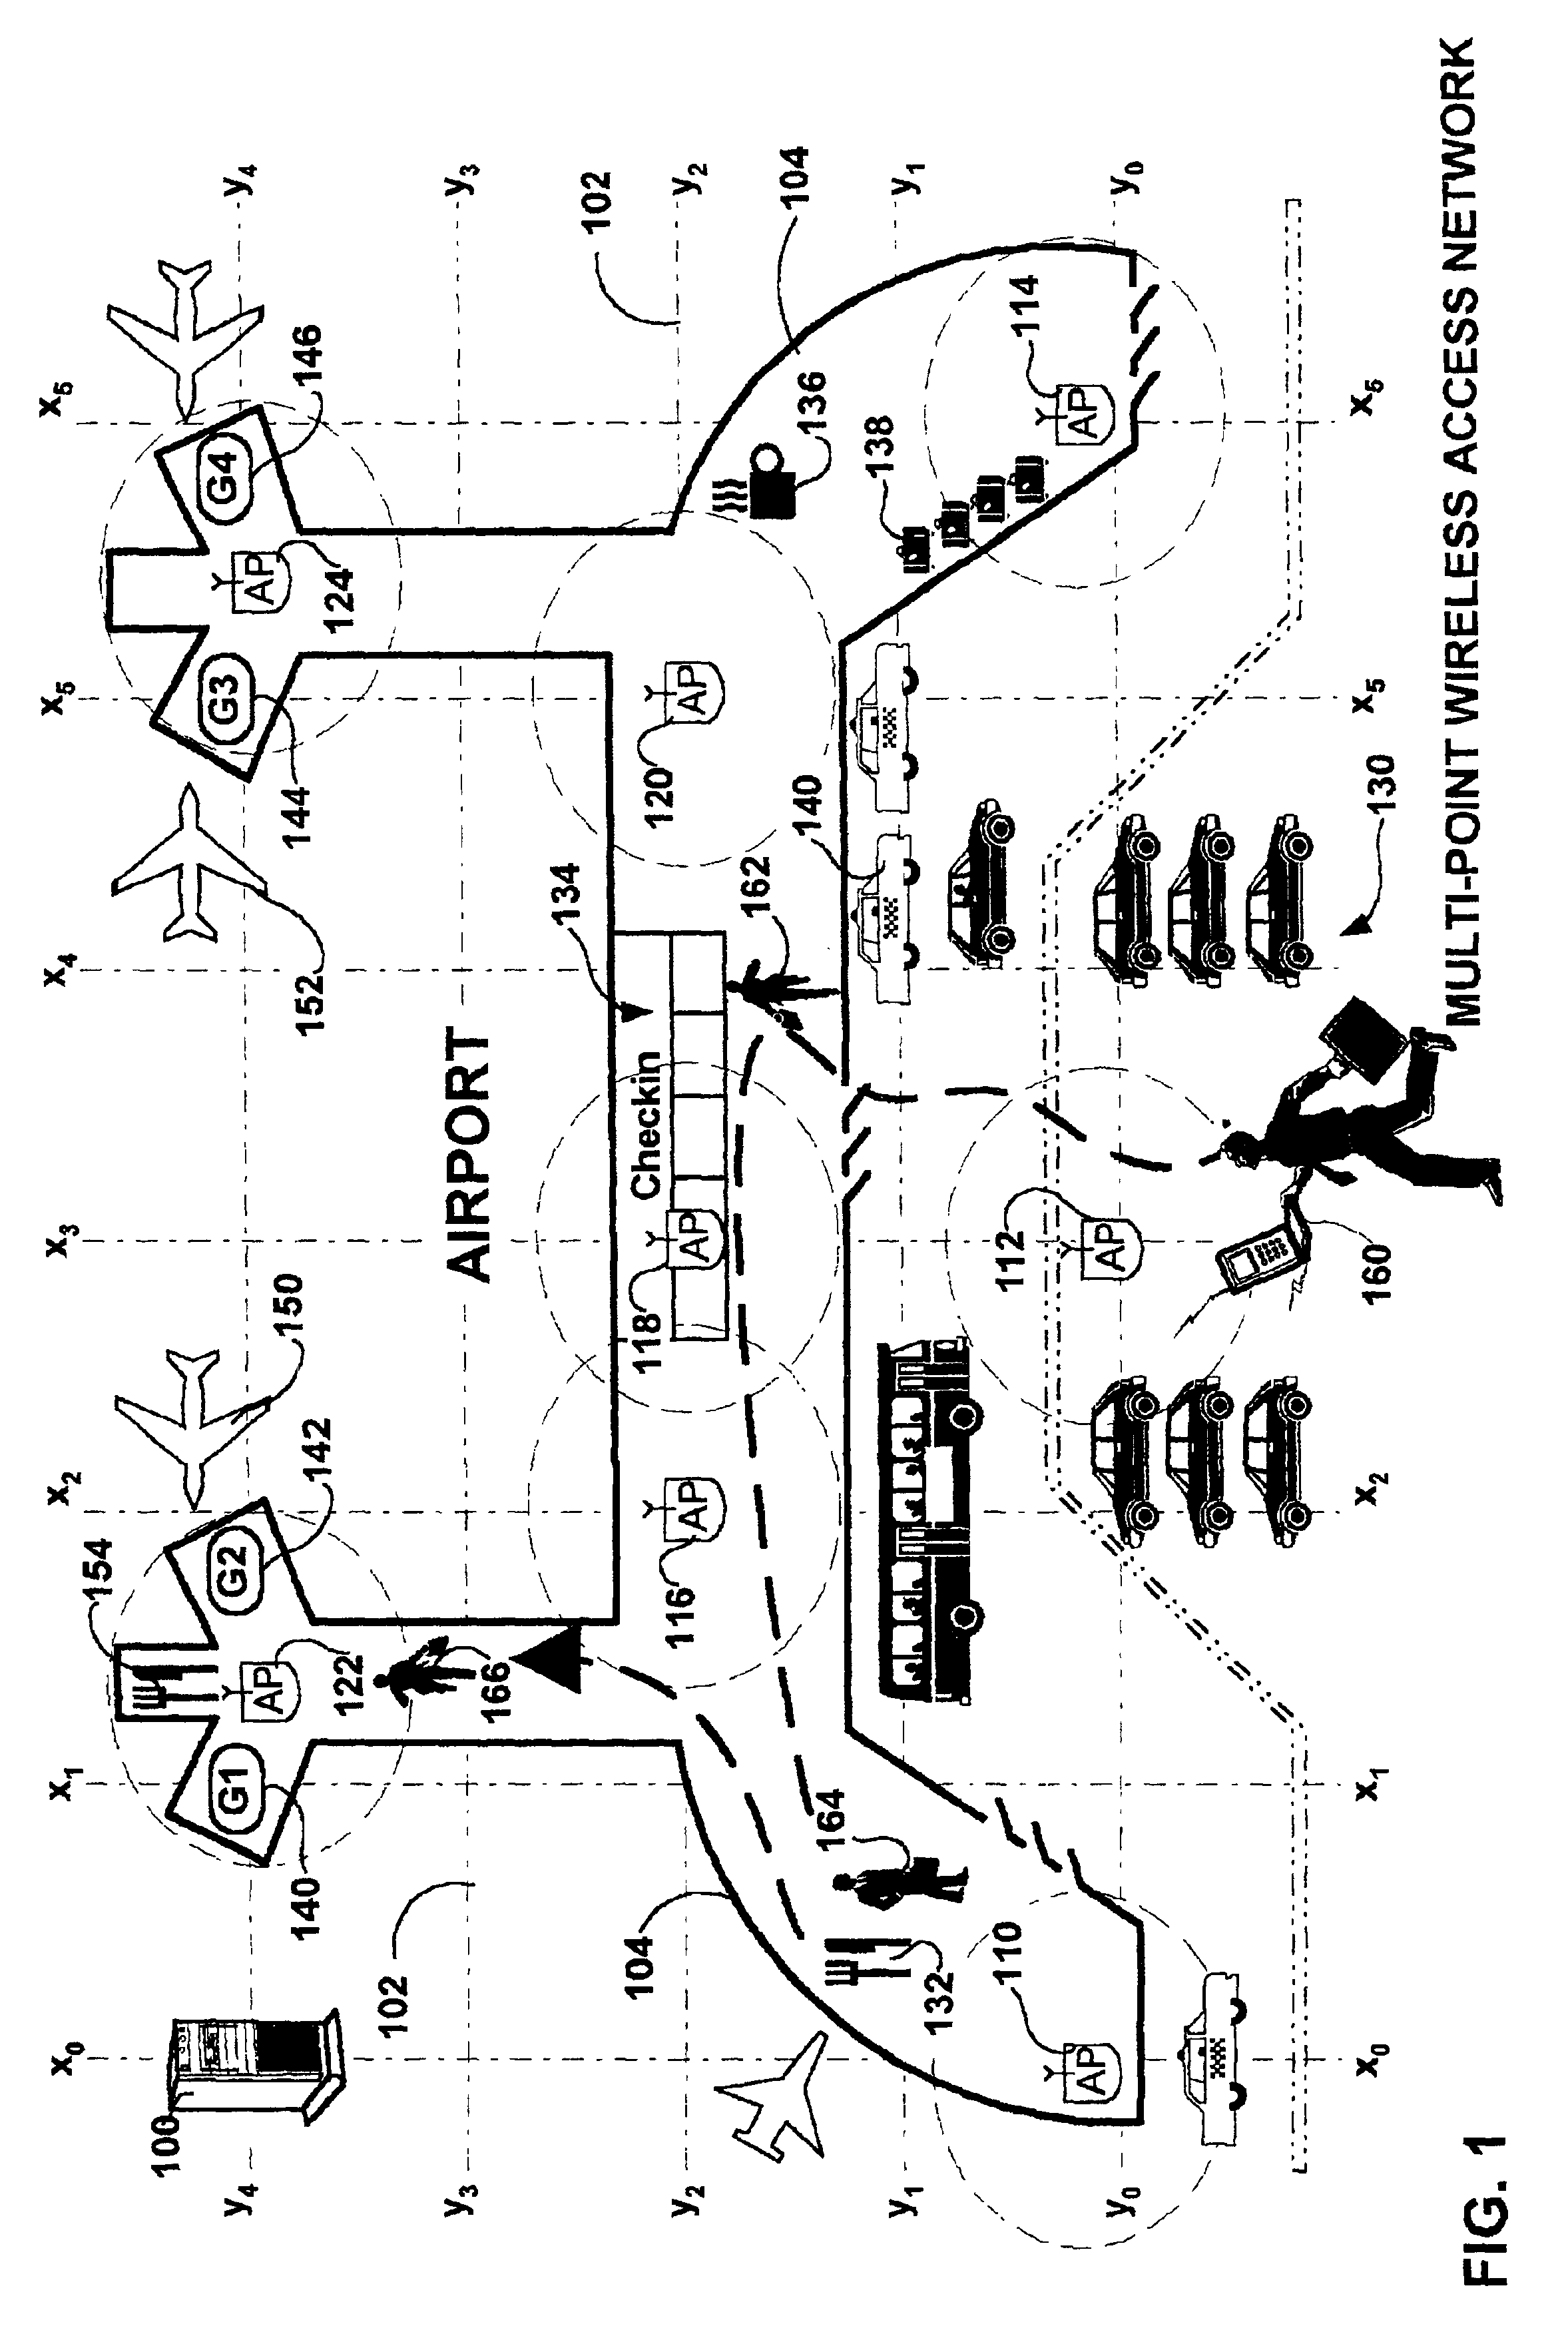 Method and apparatus for a mobile access system delivering location based information and services